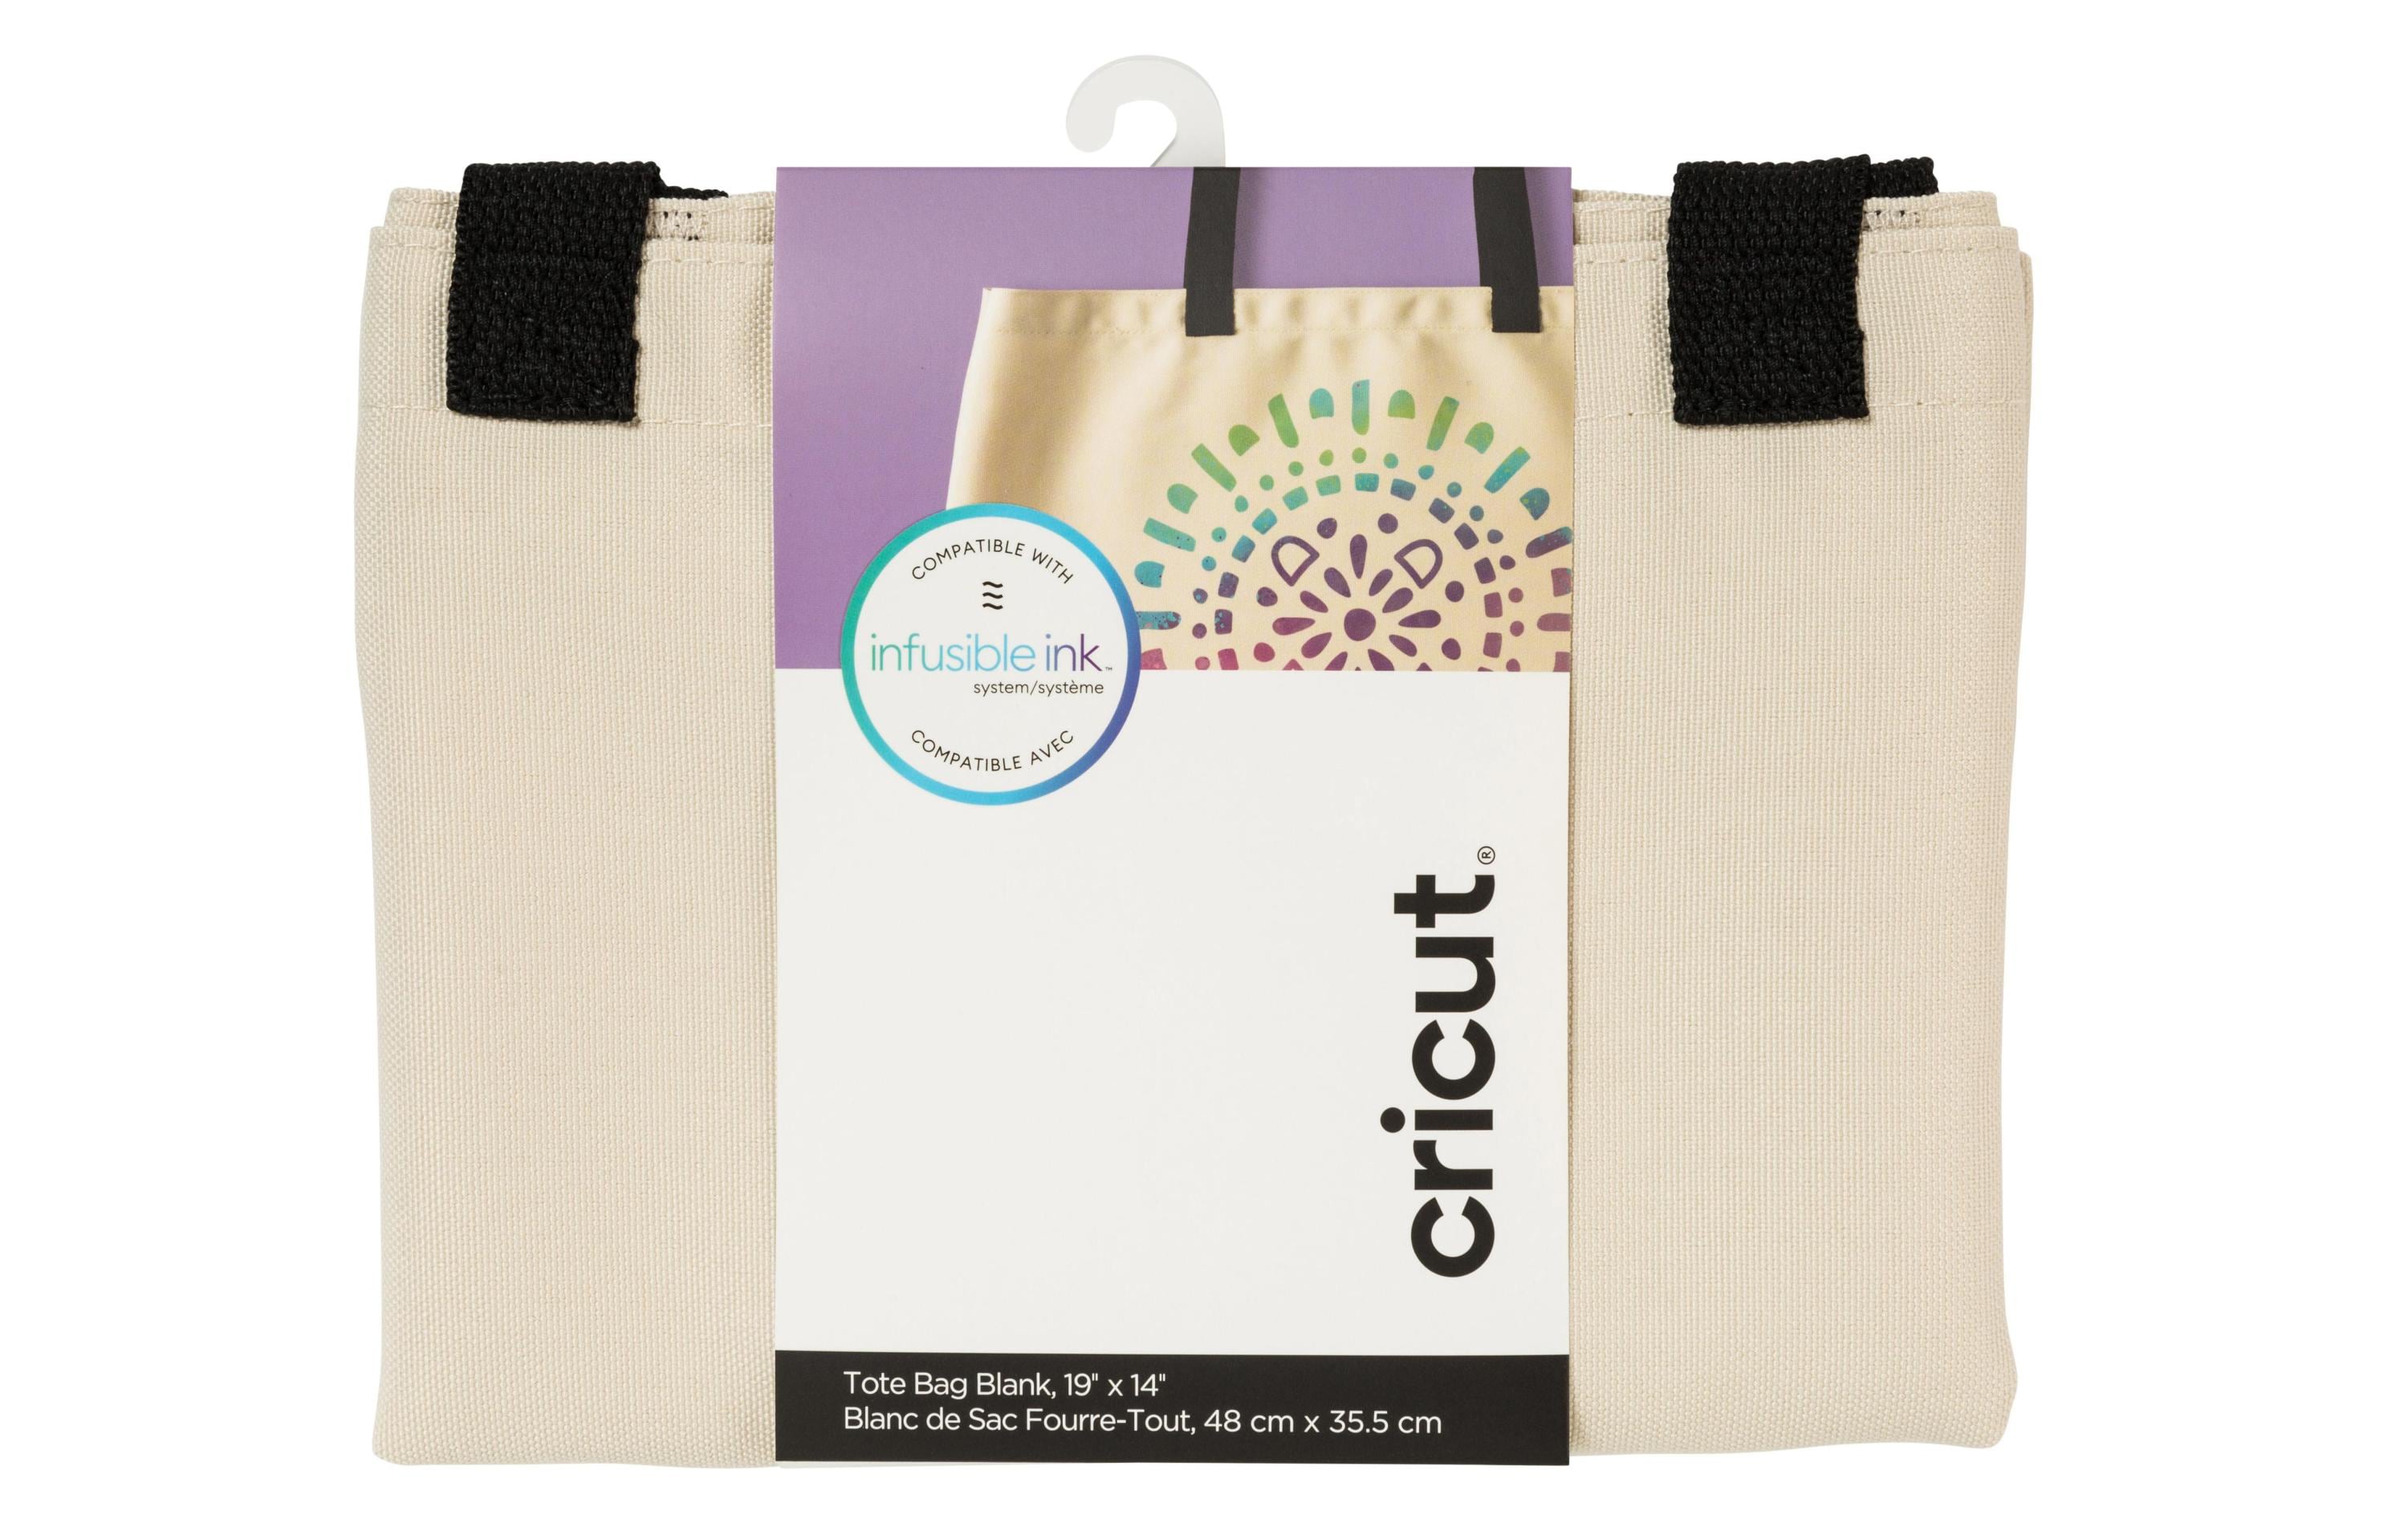 Cricut Stofftasche Infusible Ink Tote Bag Large, 48 x 35.5 cm